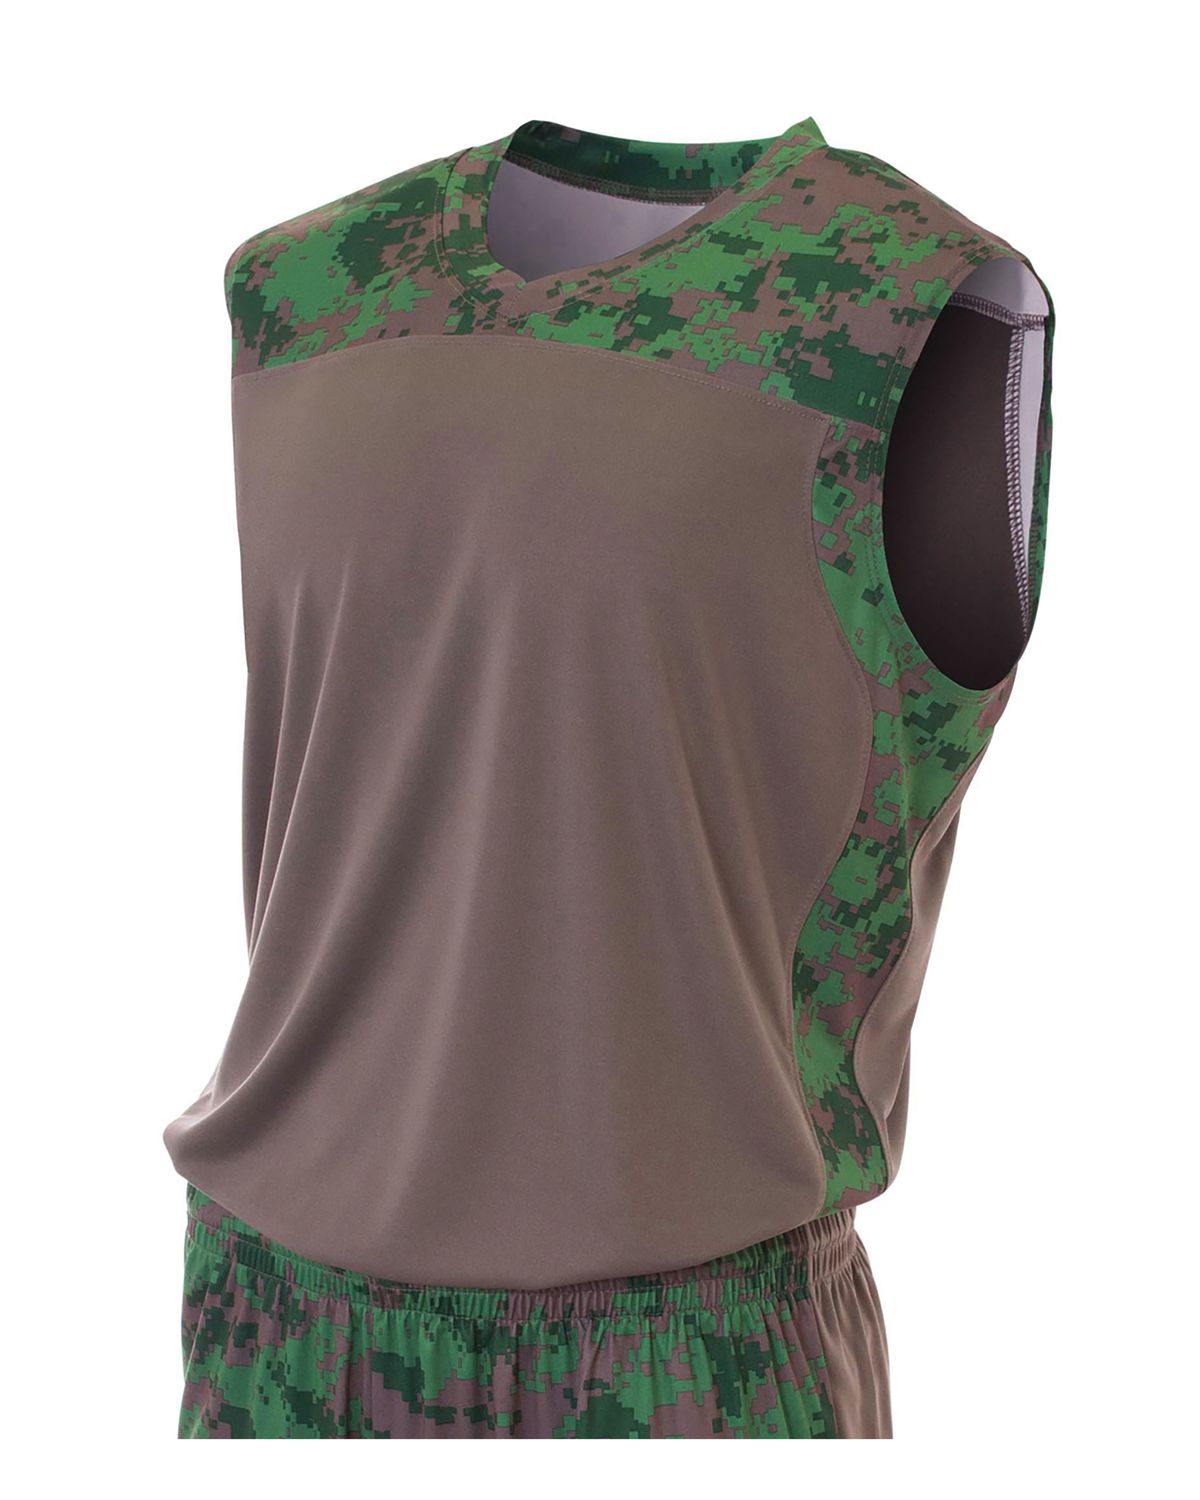 'A4 N2345 Printed Camo Performance Muscle'